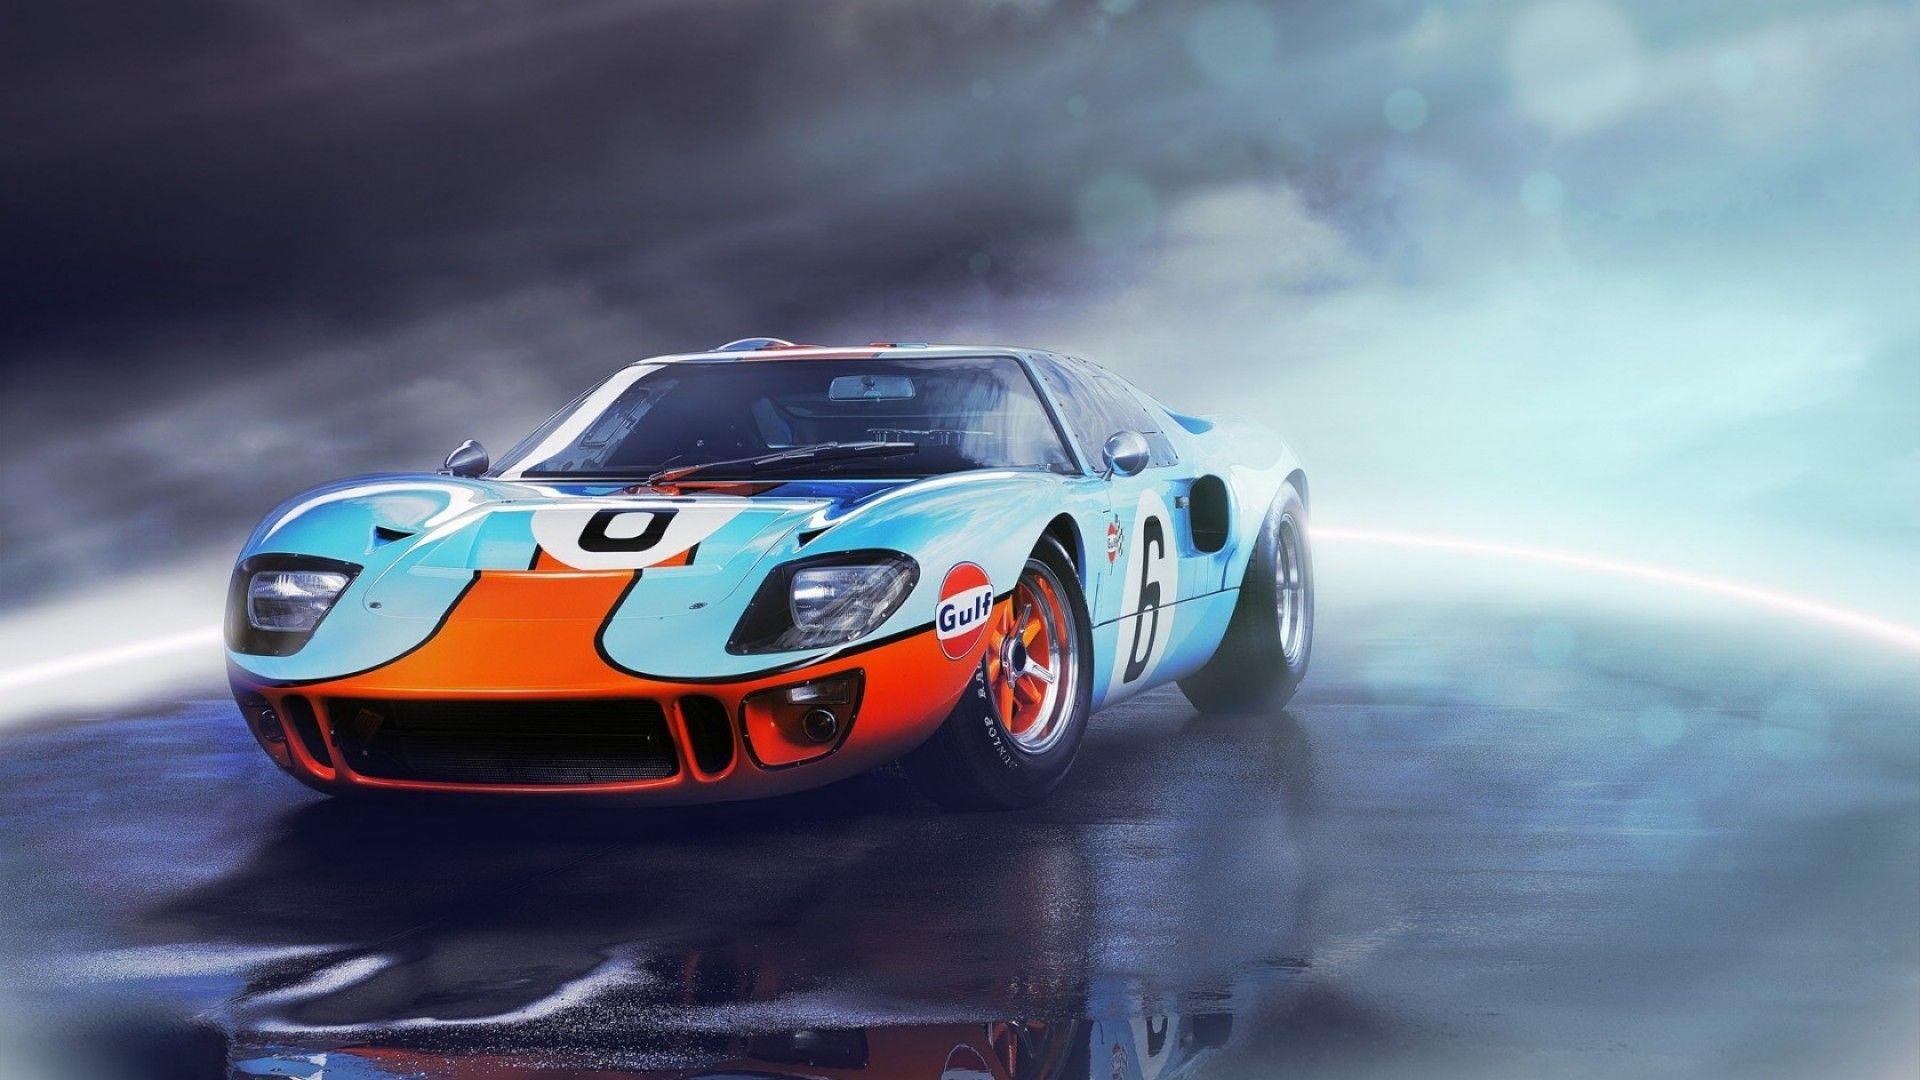 Ford Gt40 Wallpapers Top Free Ford Gt40 Backgrounds Wallpaperaccess